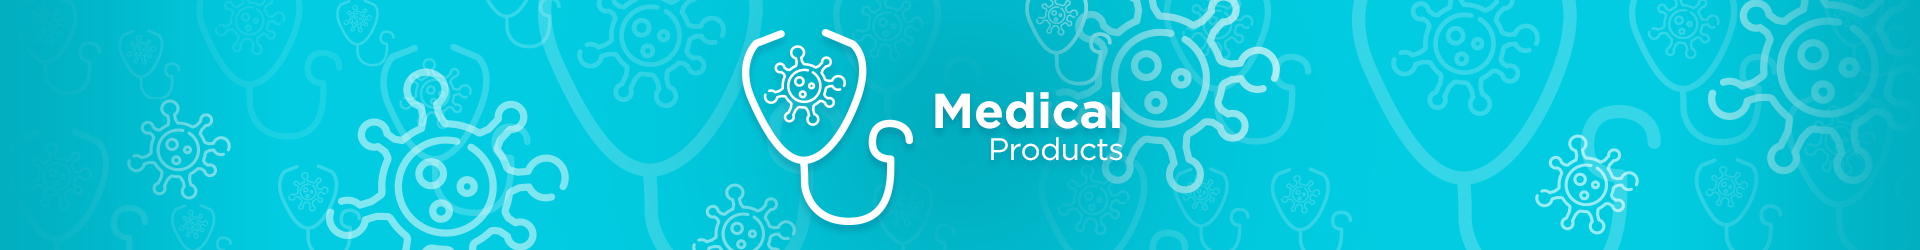 Medical Products Inslider